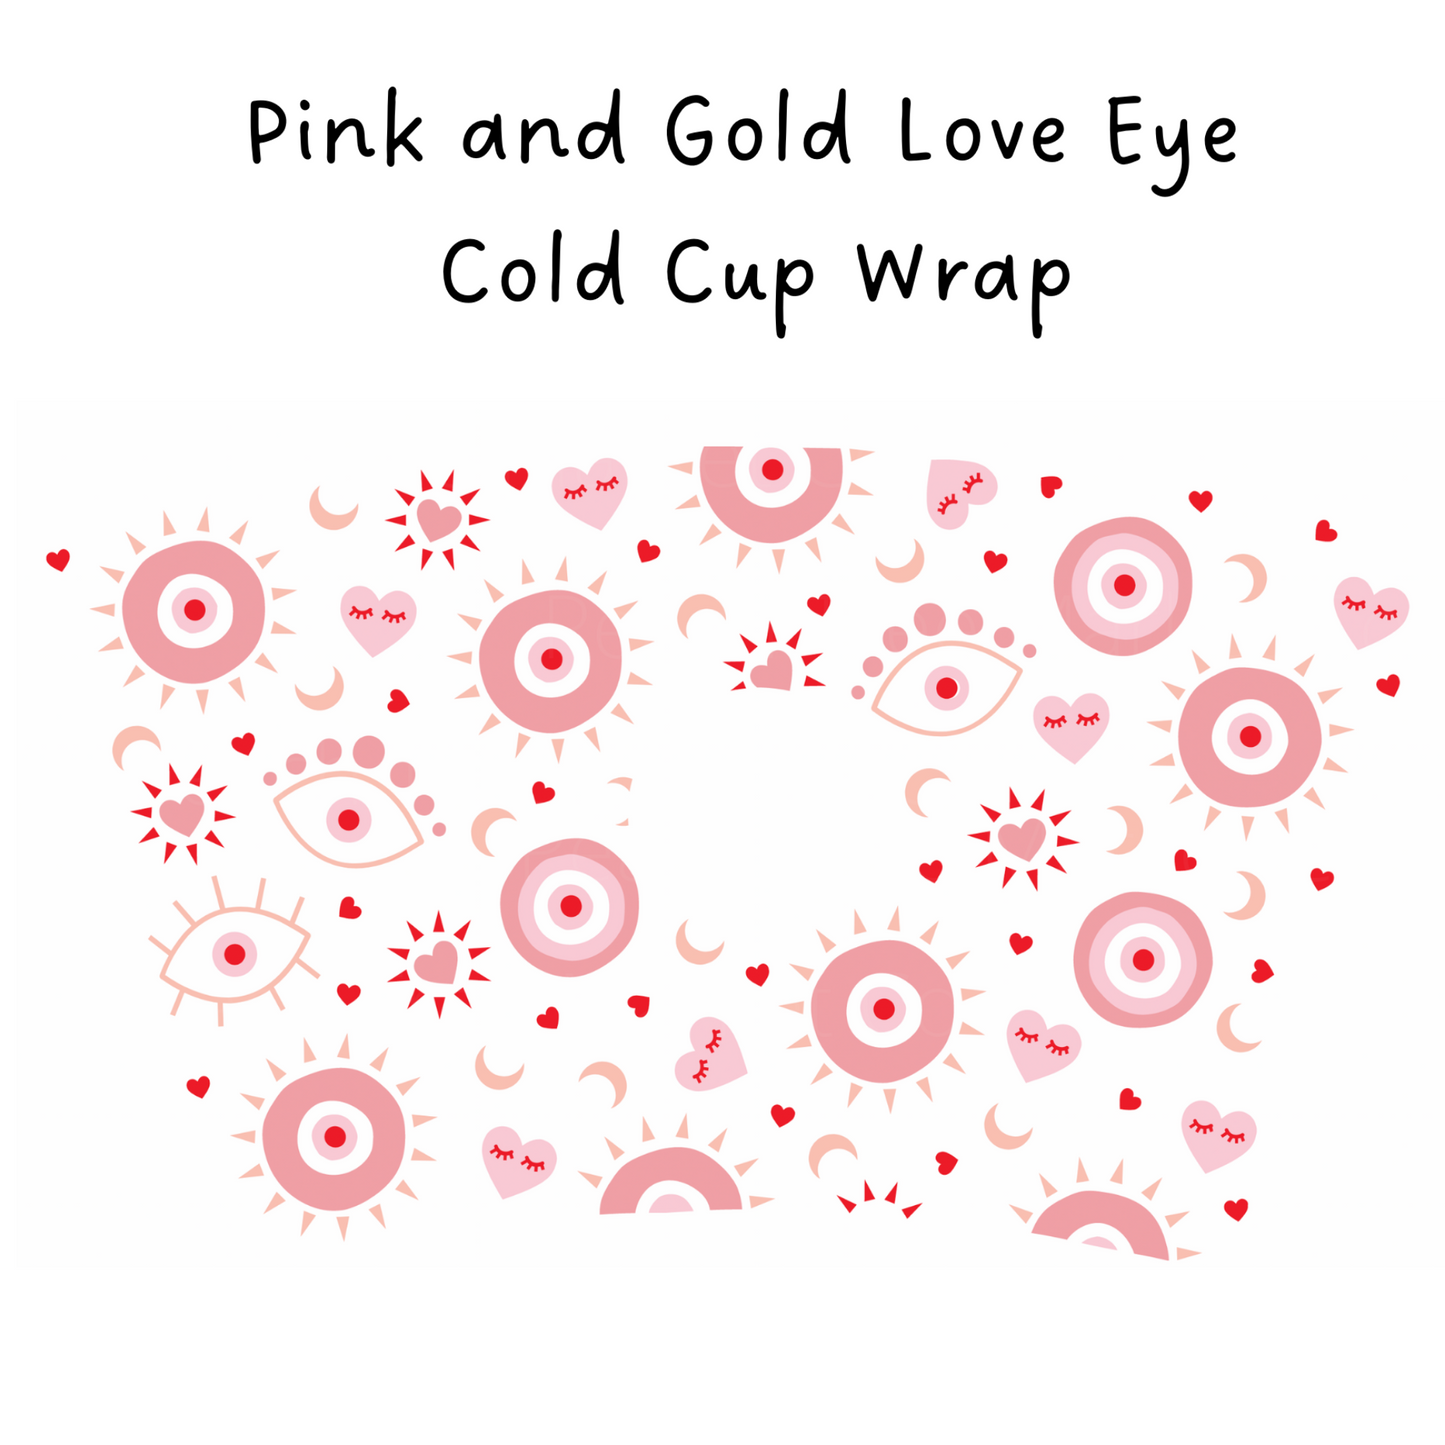 Pink and Gold Love Eye 24 OZ Cold Cup Wrap